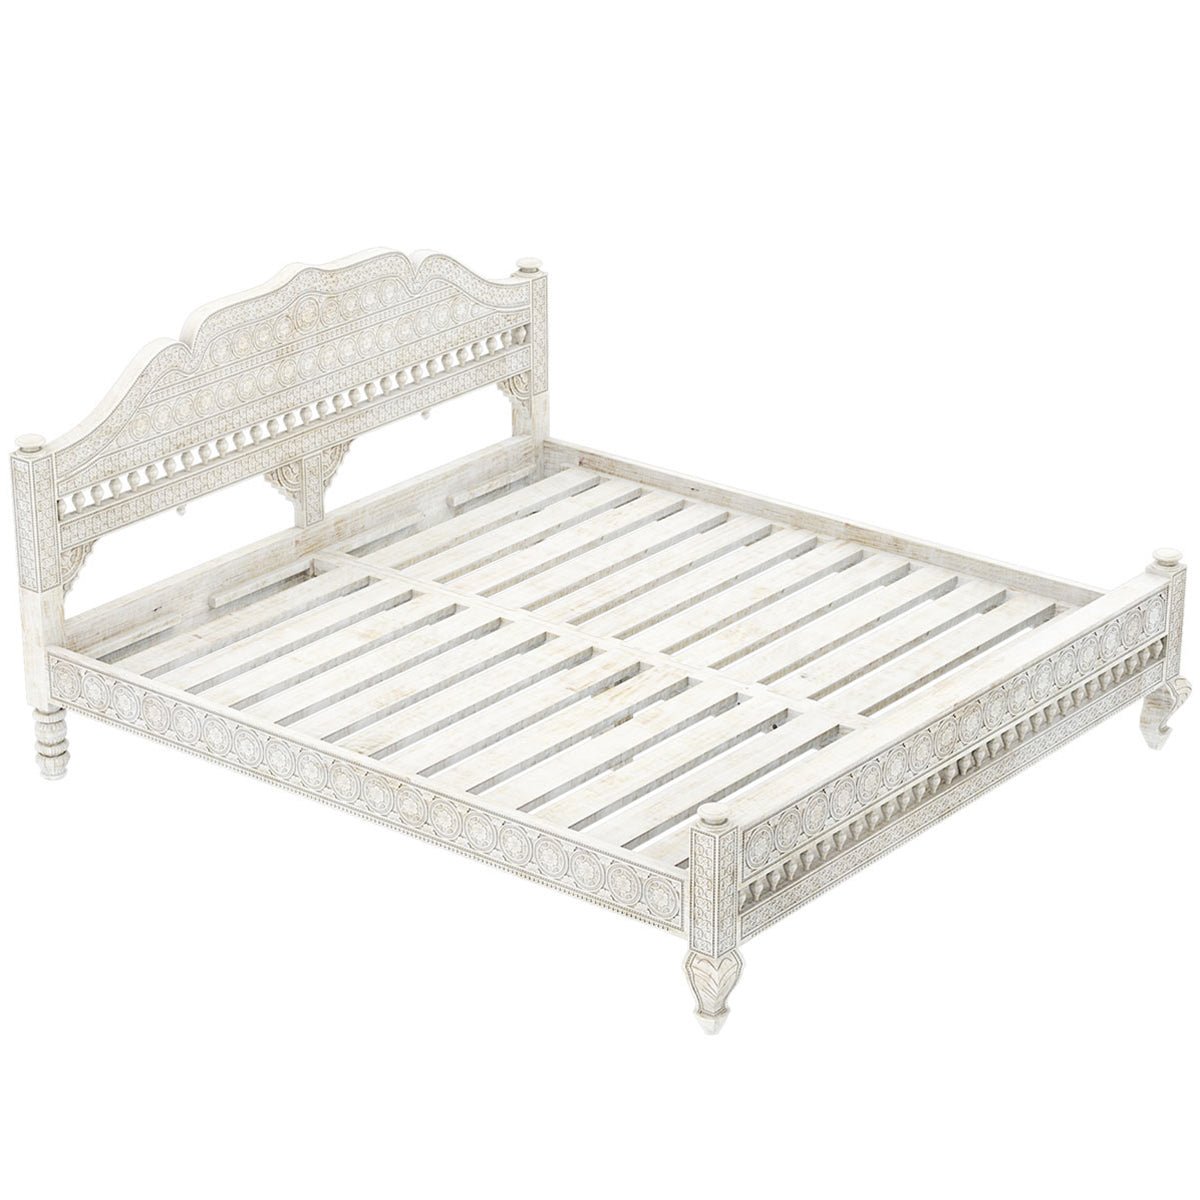 Maui Solid Wood Platform Bed With Moroccan Style Headboard